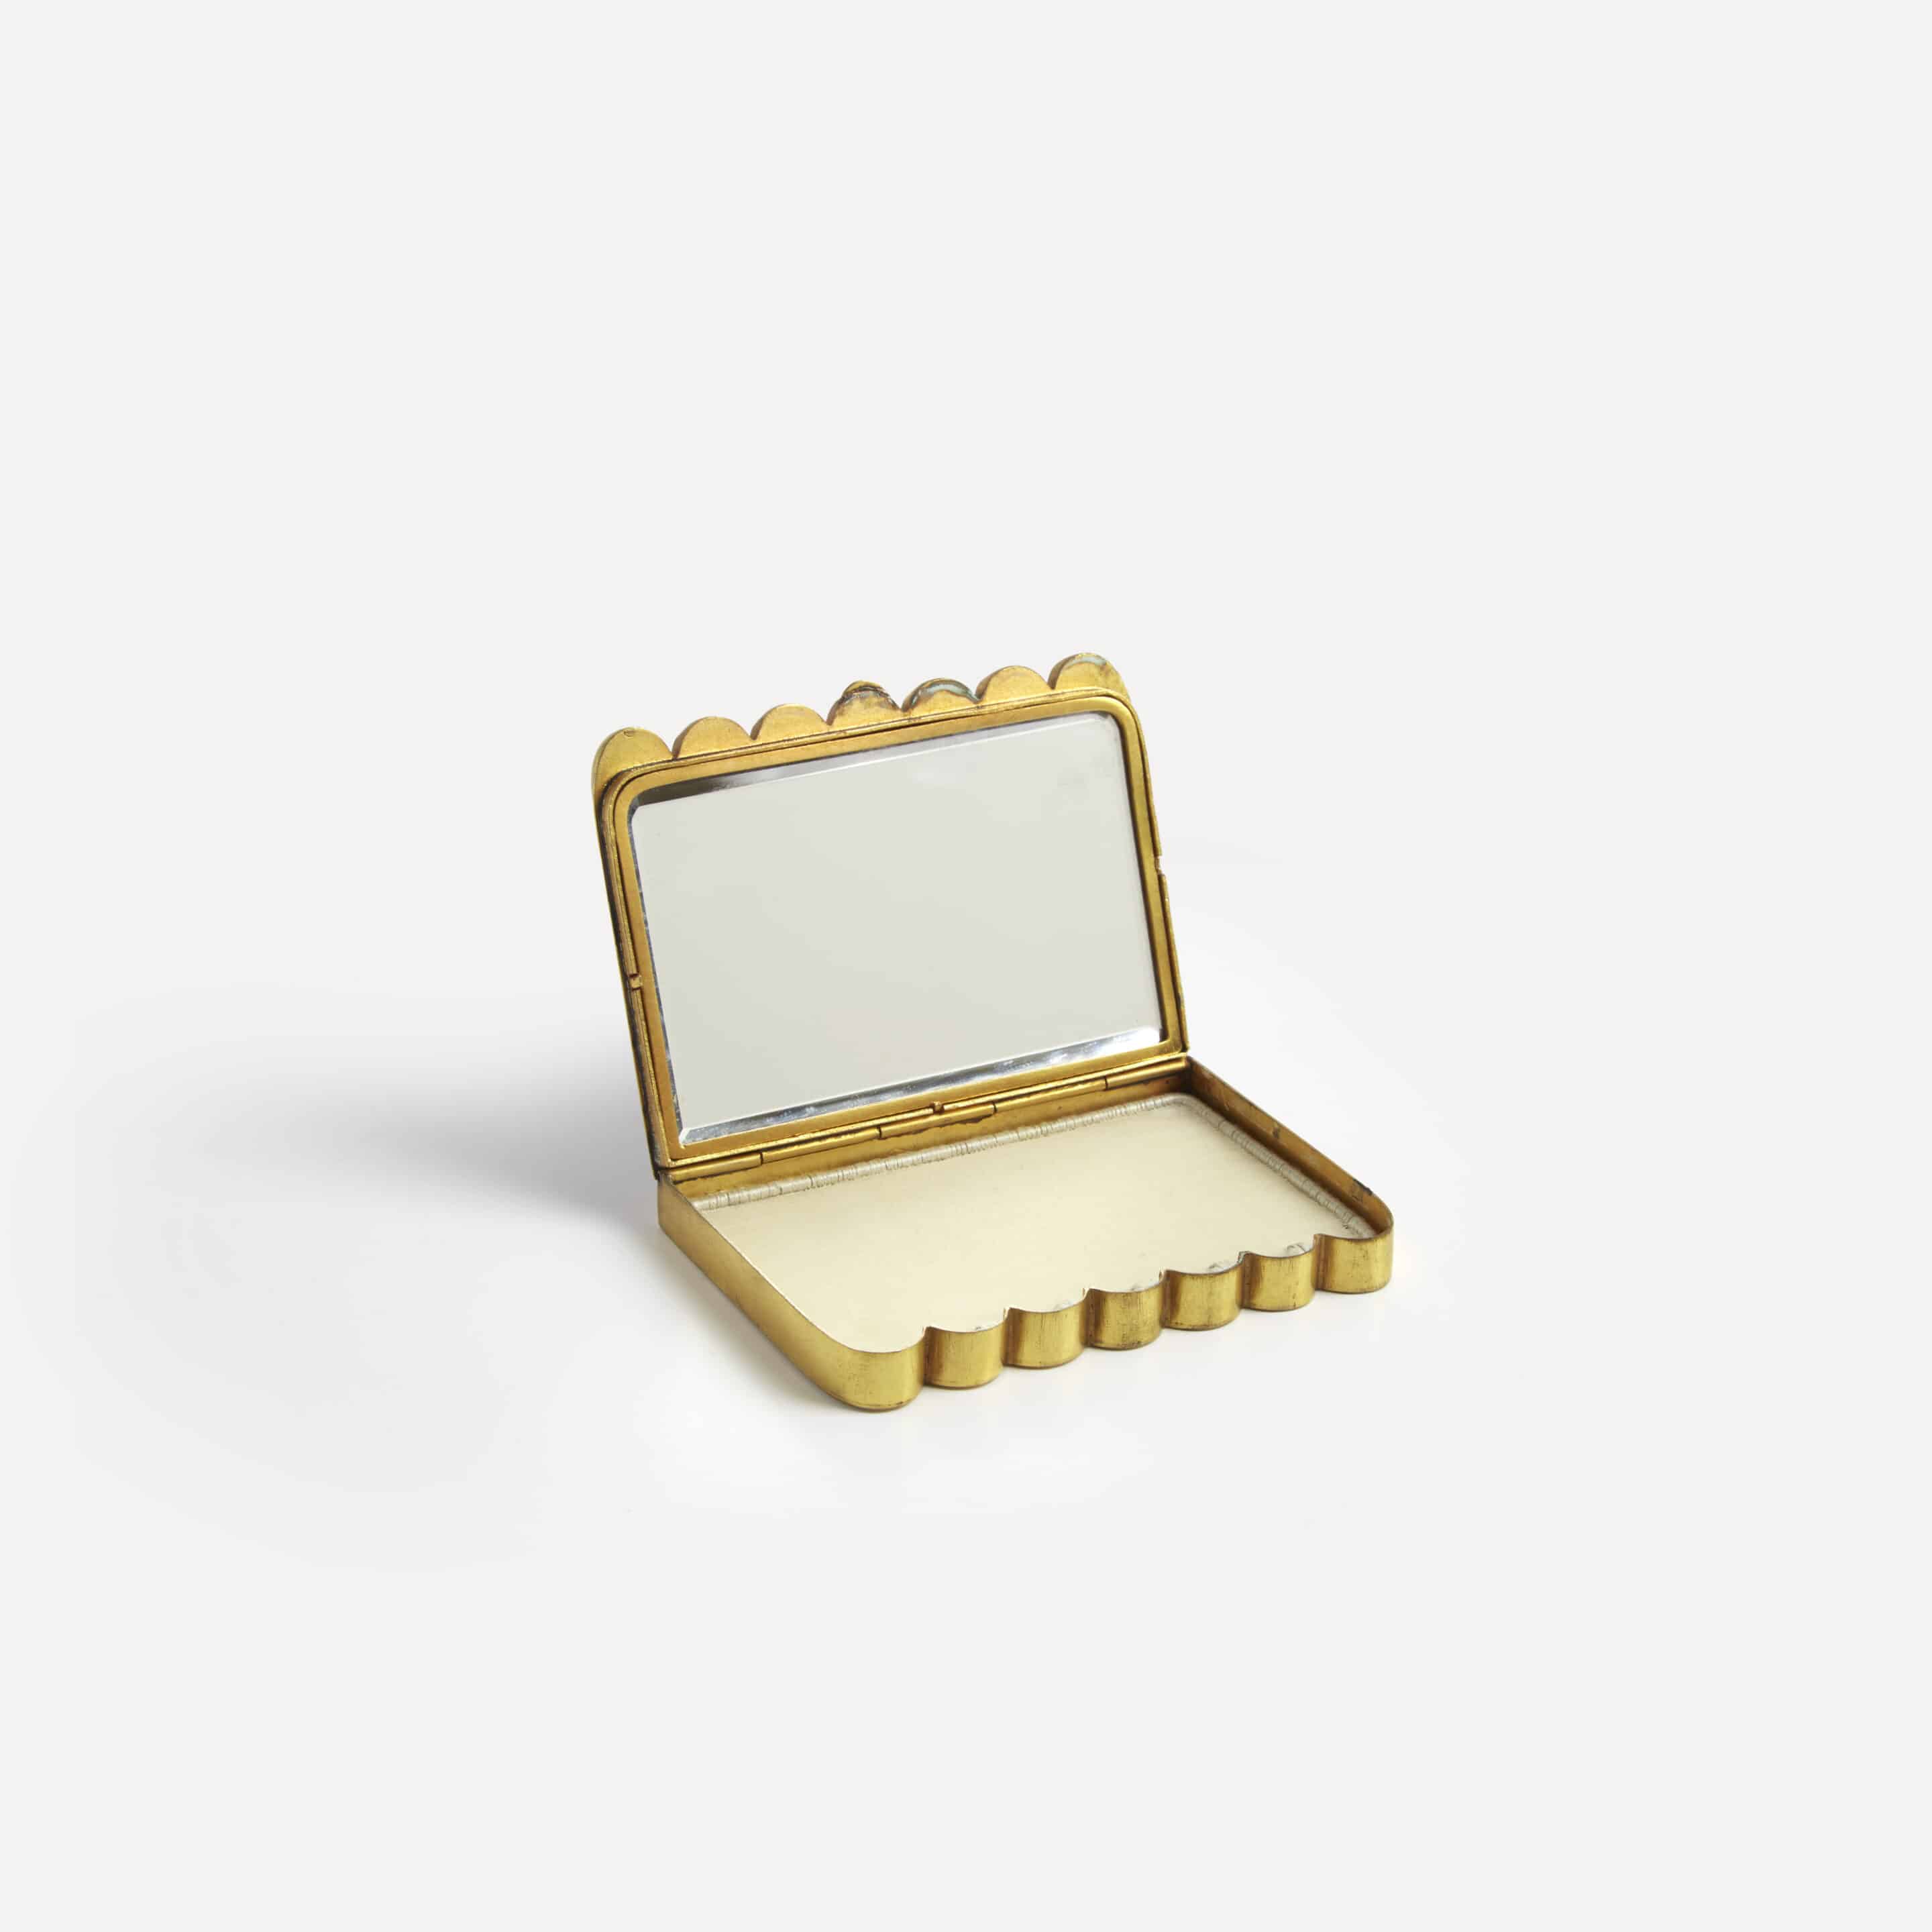 Lily of the valley gilded box by Line Vautrin